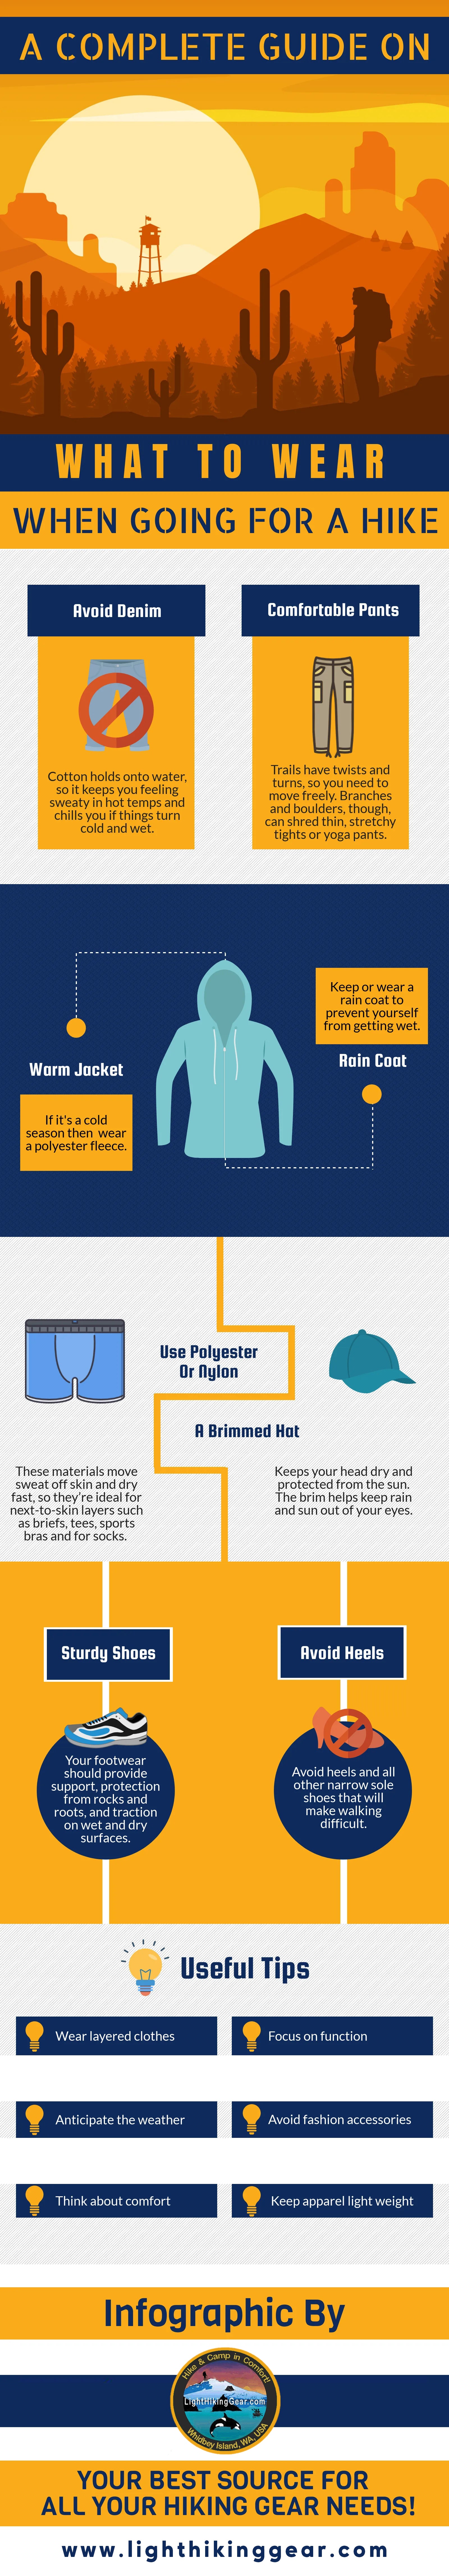 A Complete Guide On What To Wear When Going For A Hike